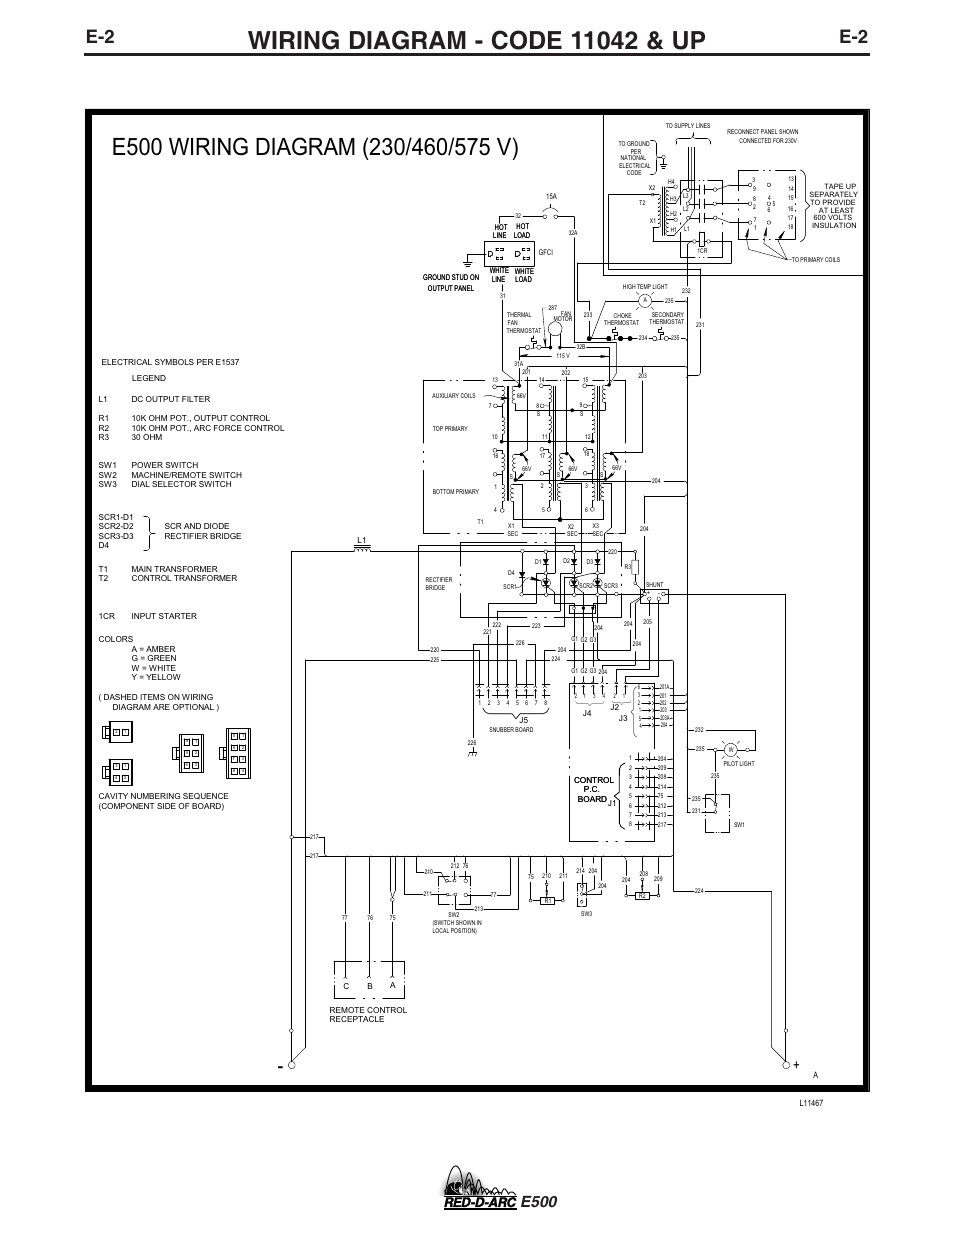 Lincoln Classic 300d Wiring Diagram - Wiring Diagram